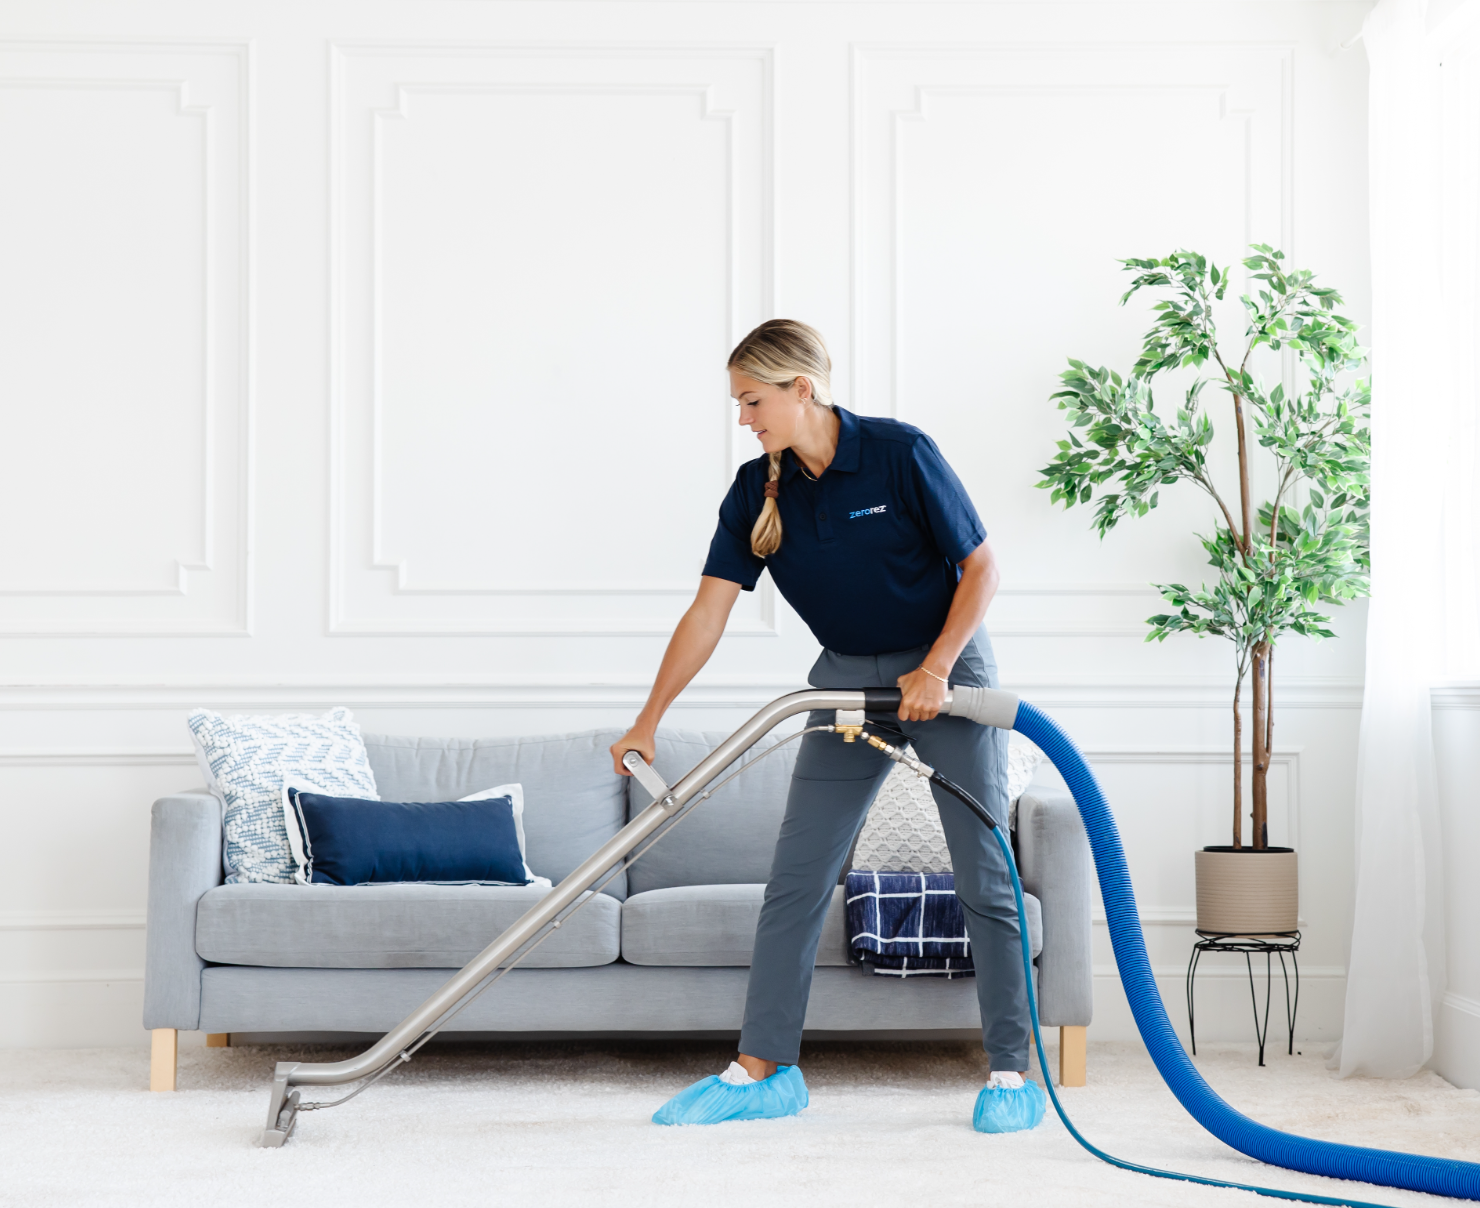 Zerorez female technician cleaning a living room with a Zr™ Wand, which extracts dirt and grime from a white carpet, leaving no sticky residue behind after cleaning